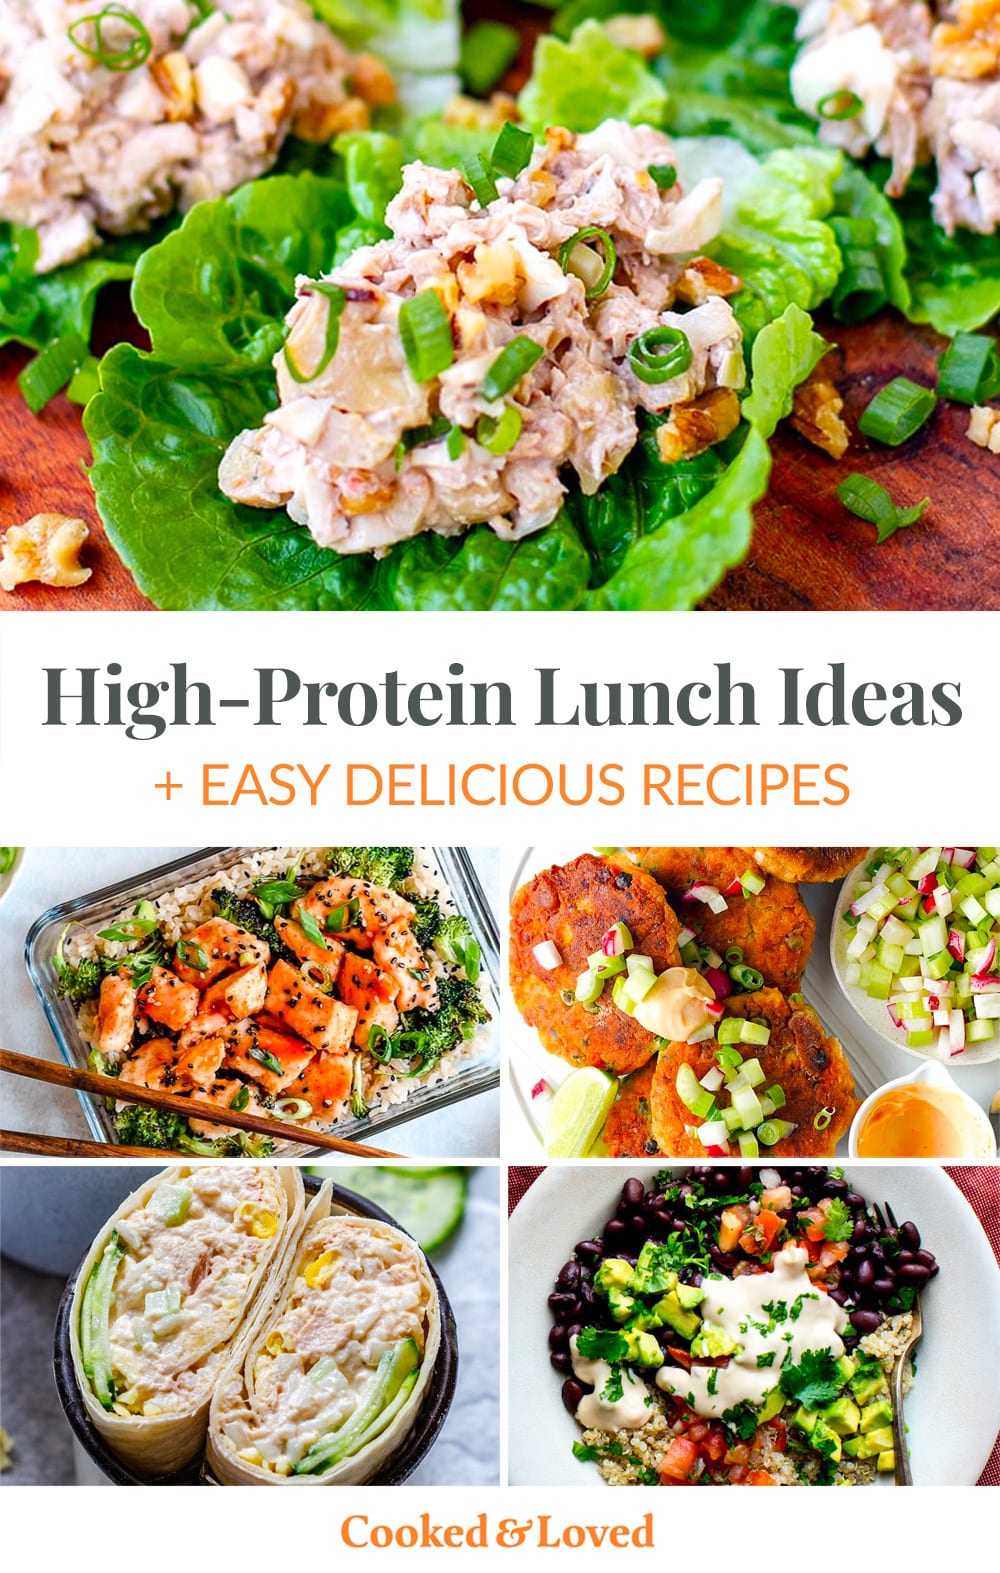 High-Protein Lunch Ideas & Recipes